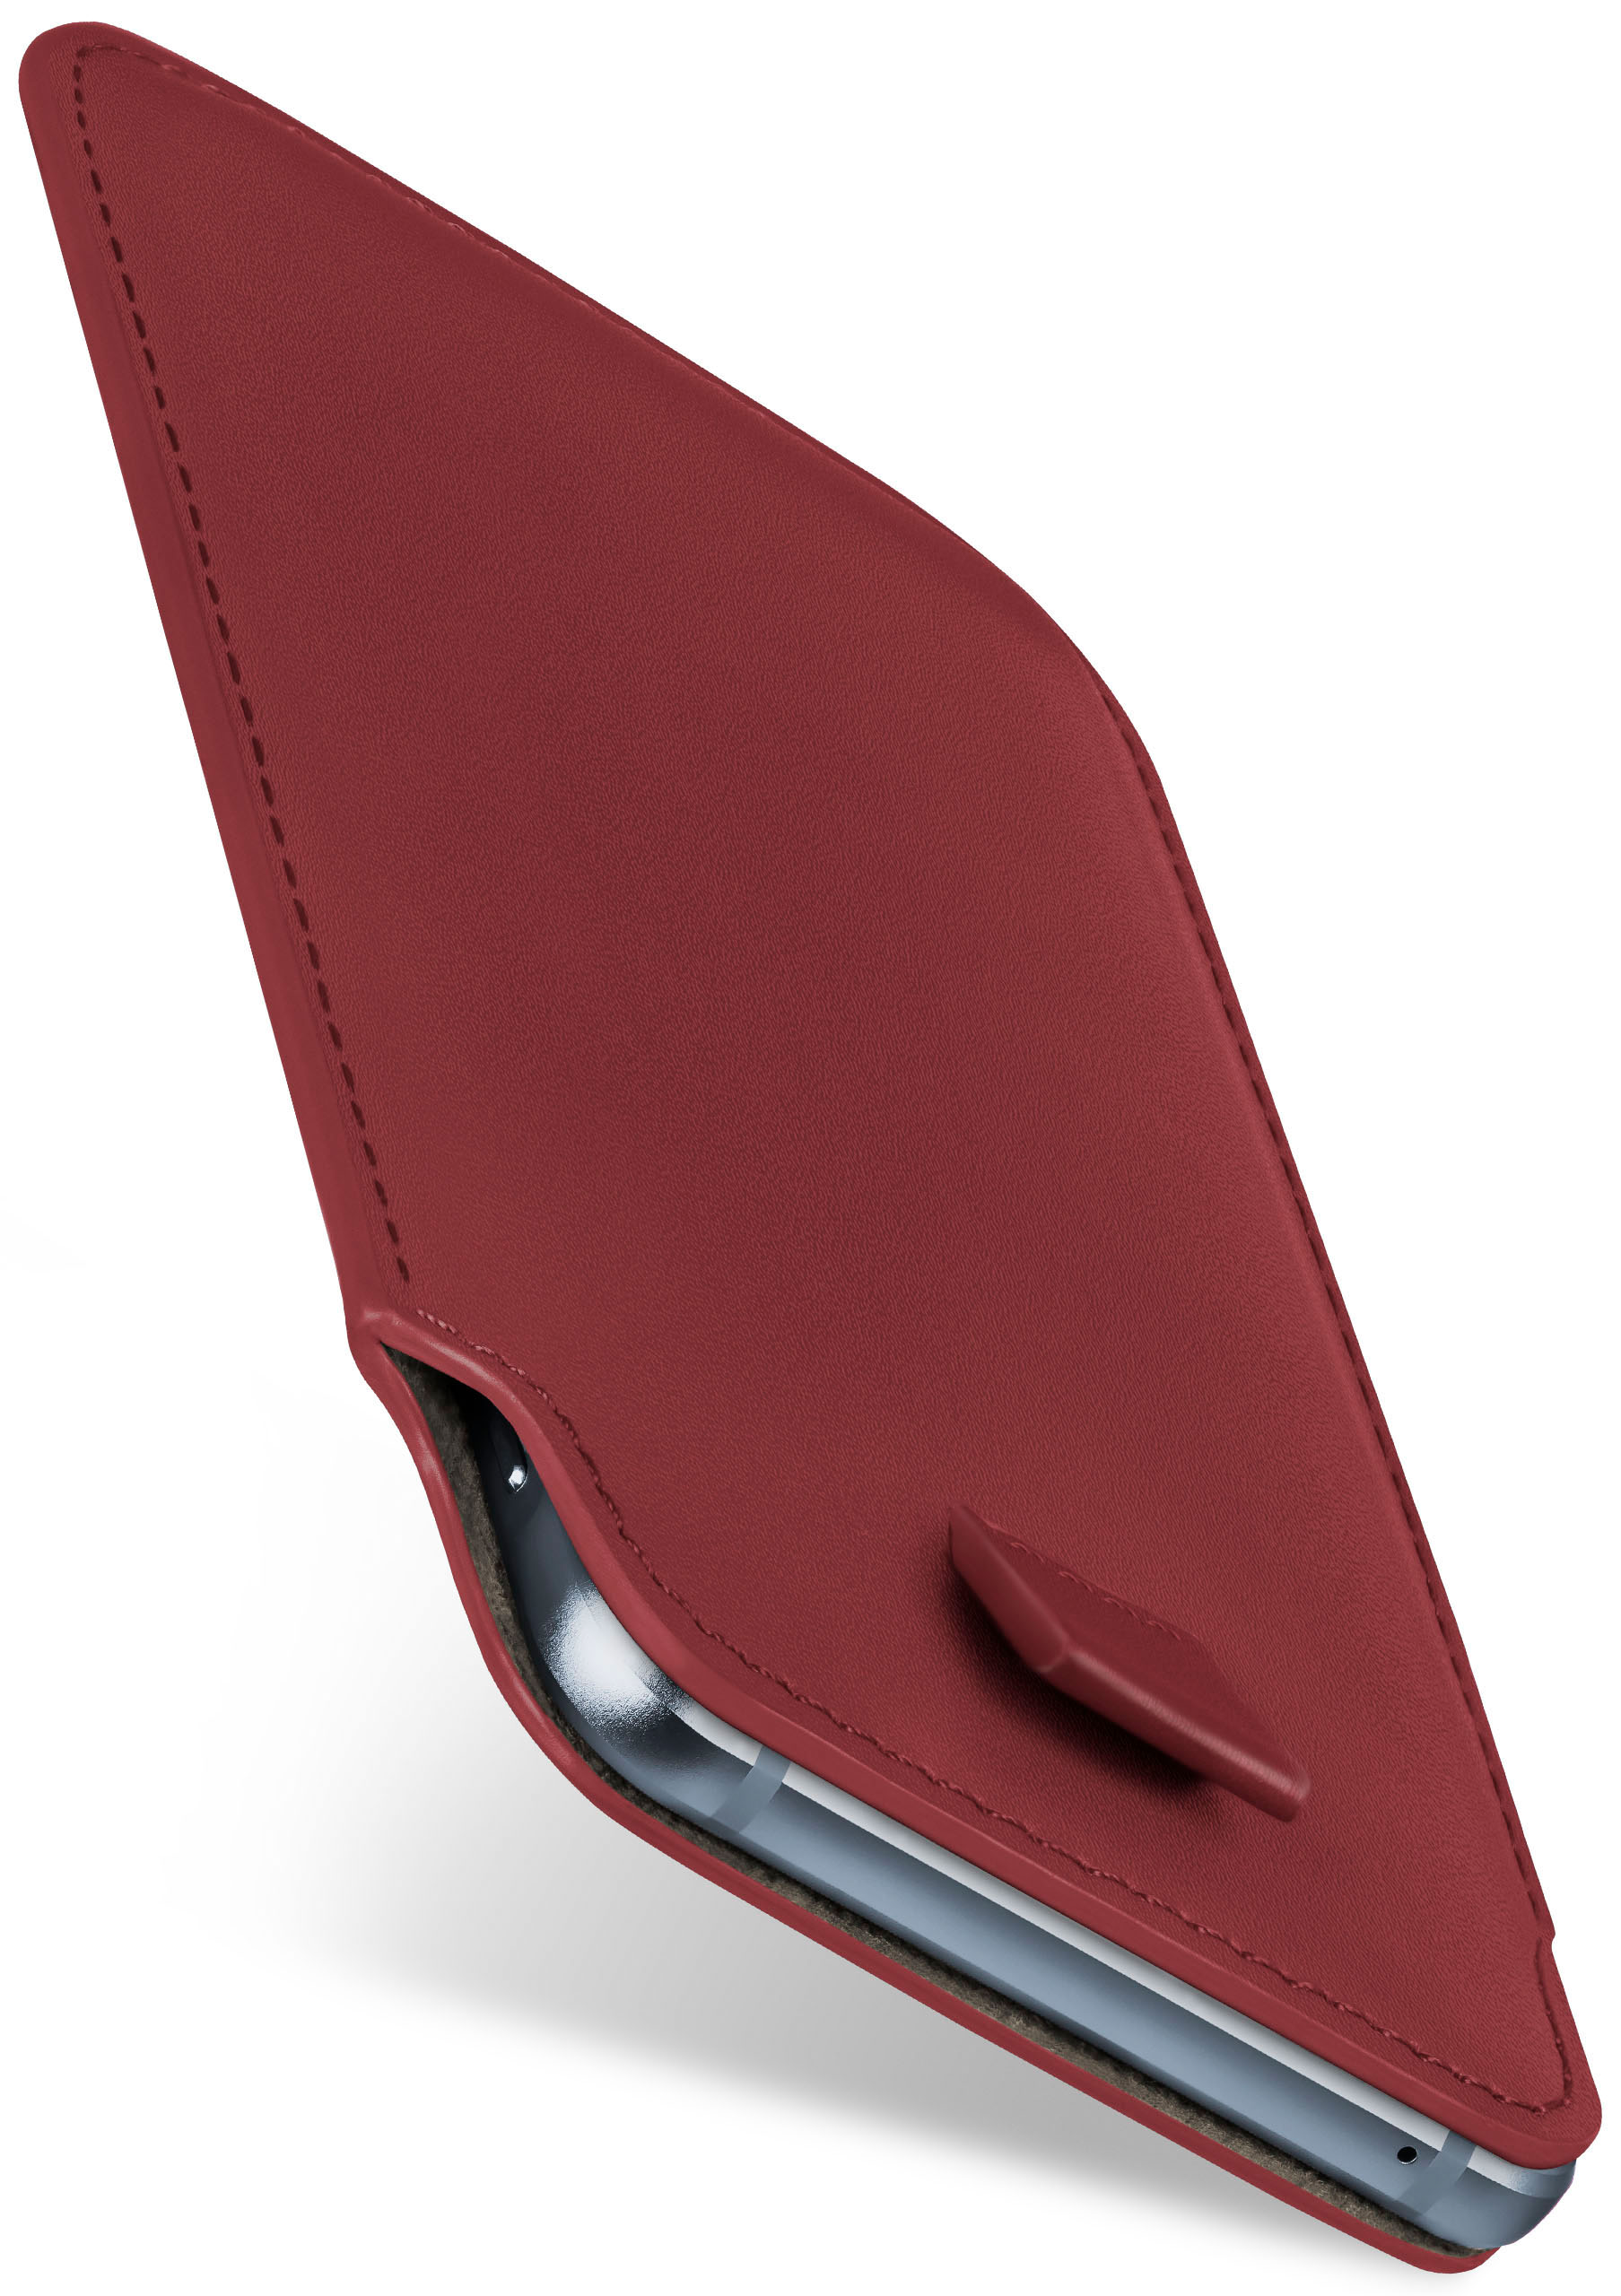 Slide Cover, Case, MOEX Maroon-Red One, OnePlus, Full